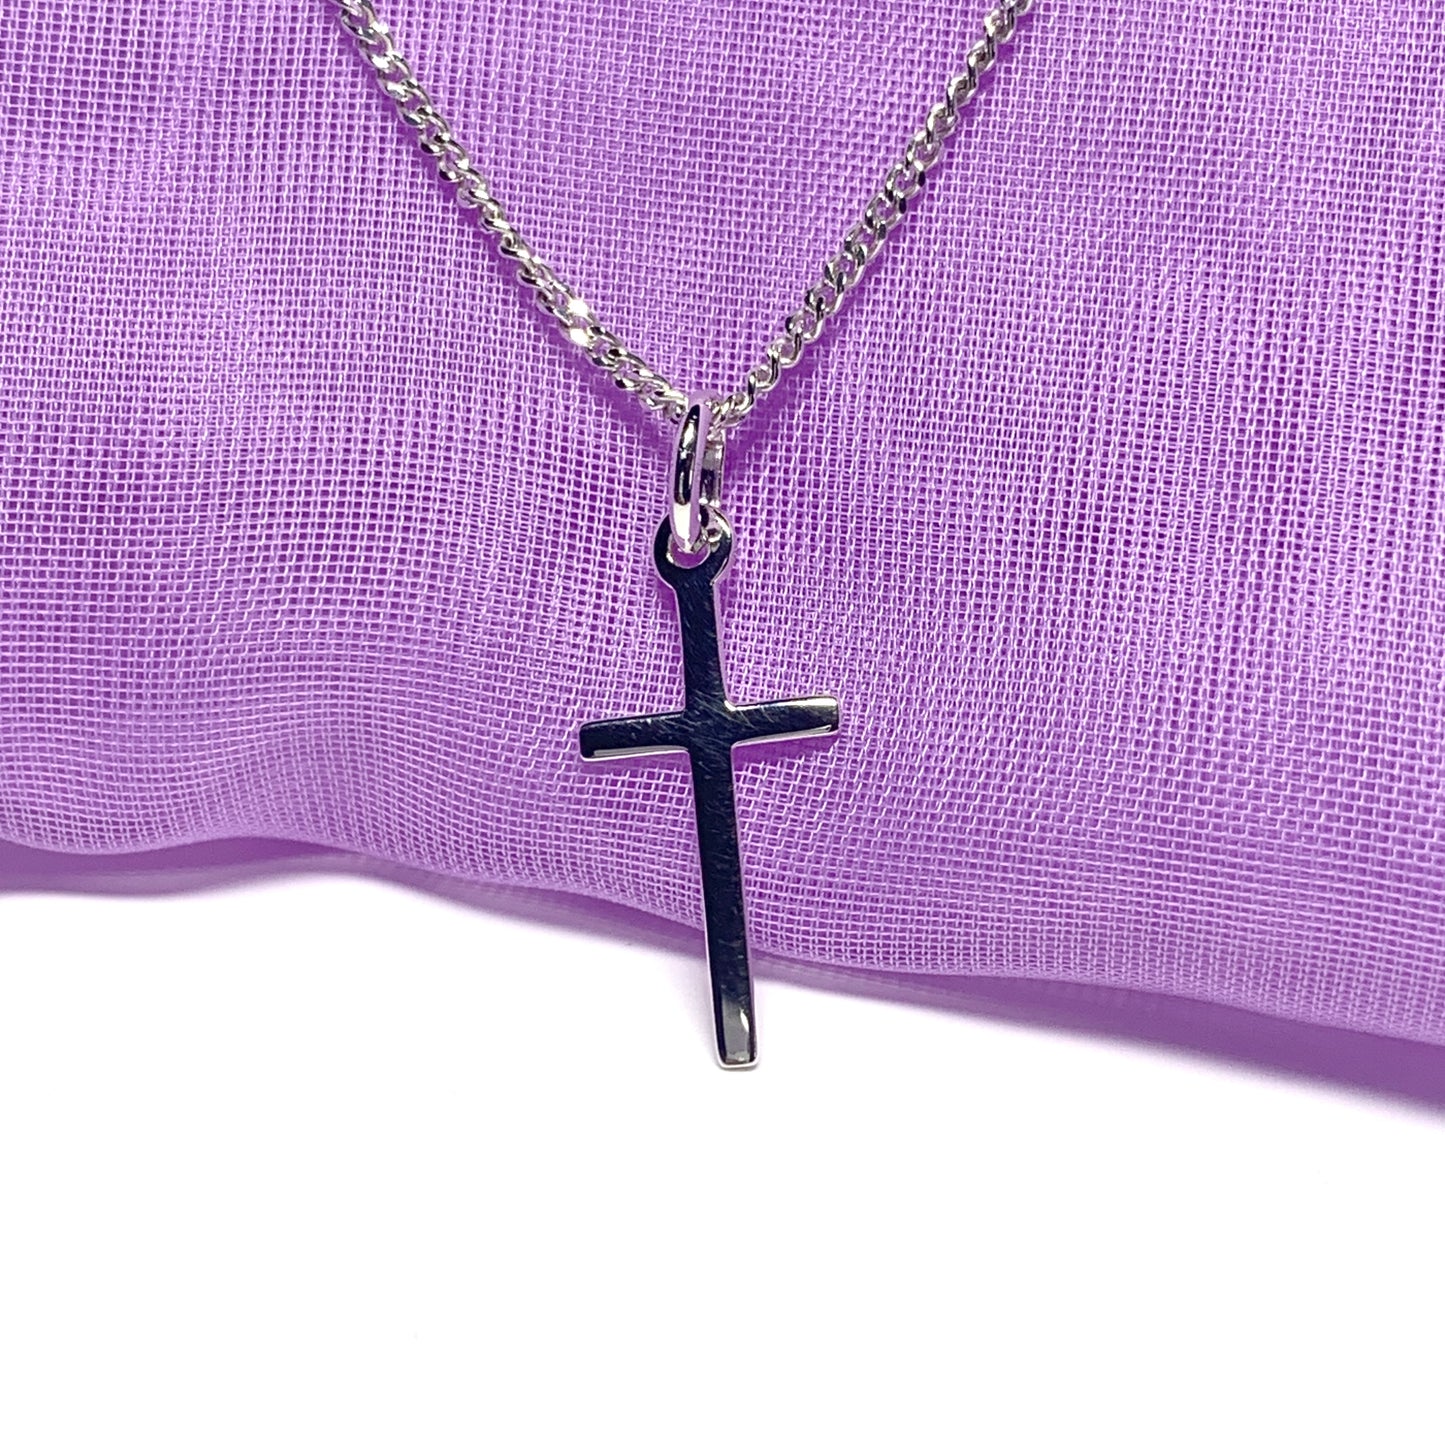 Small cross solid plain polished sterling silver including chain